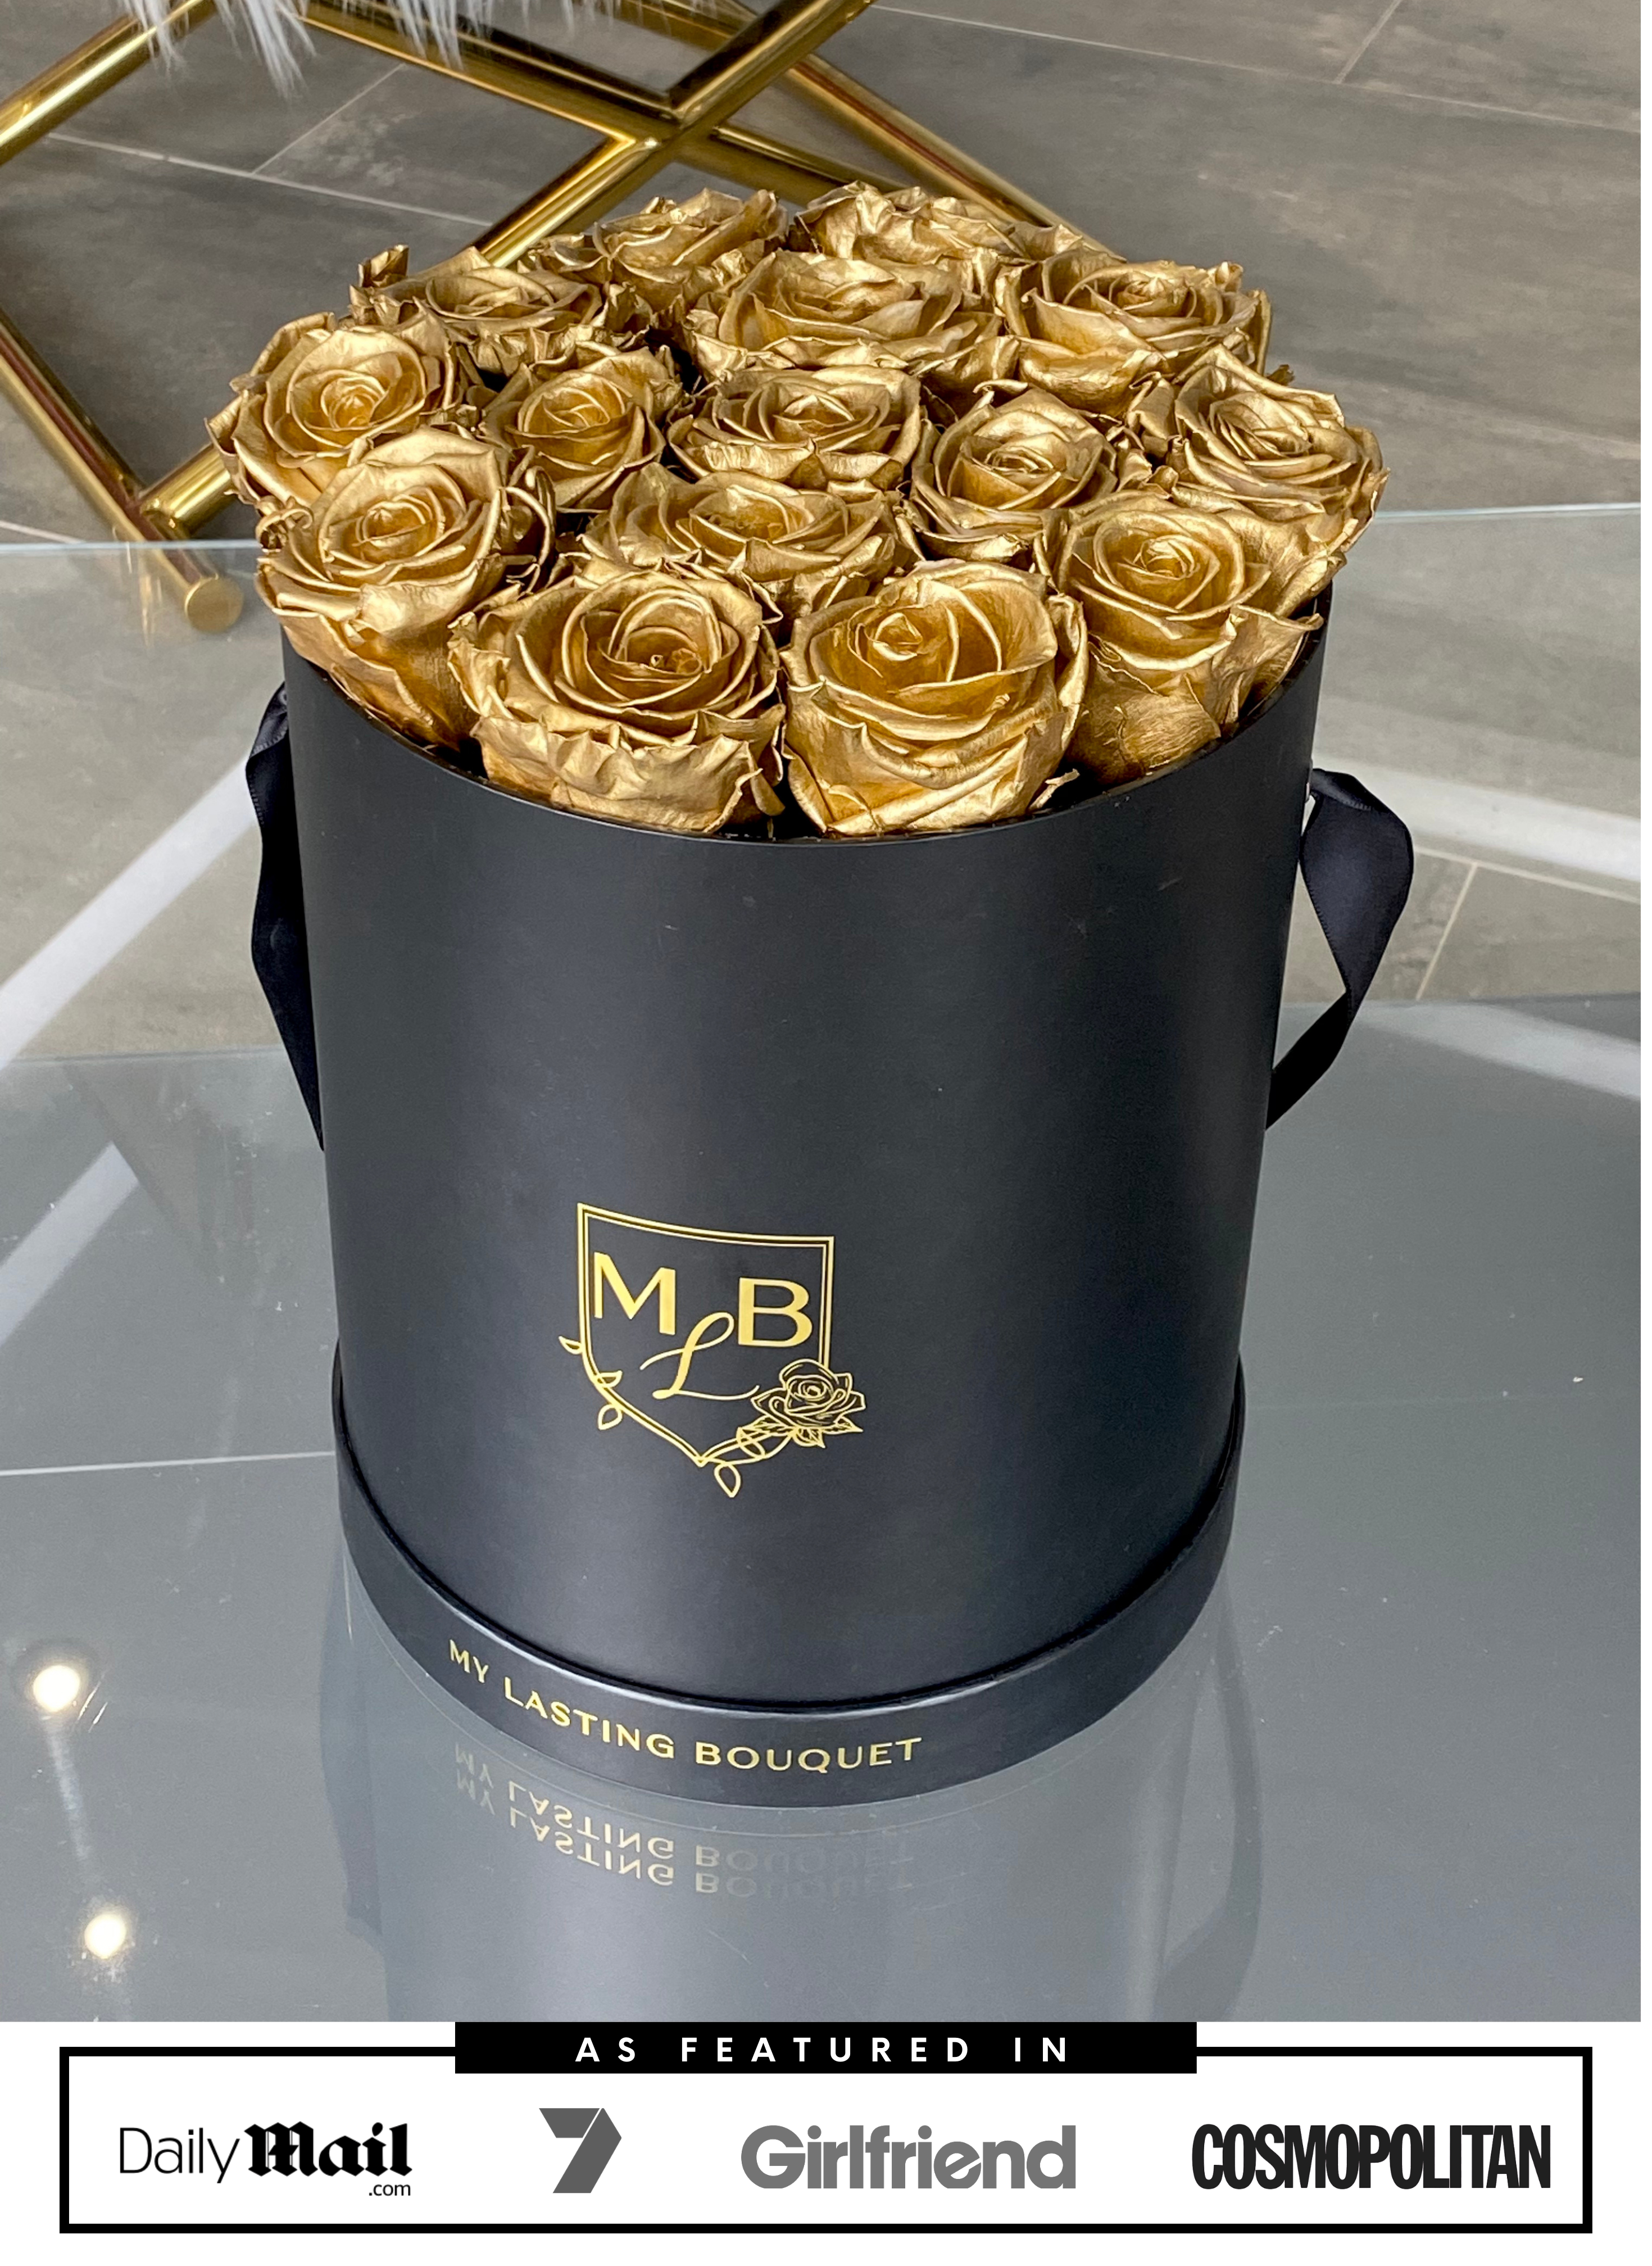 Round Rose Box- Gold Roses - My Lasting Bouquet